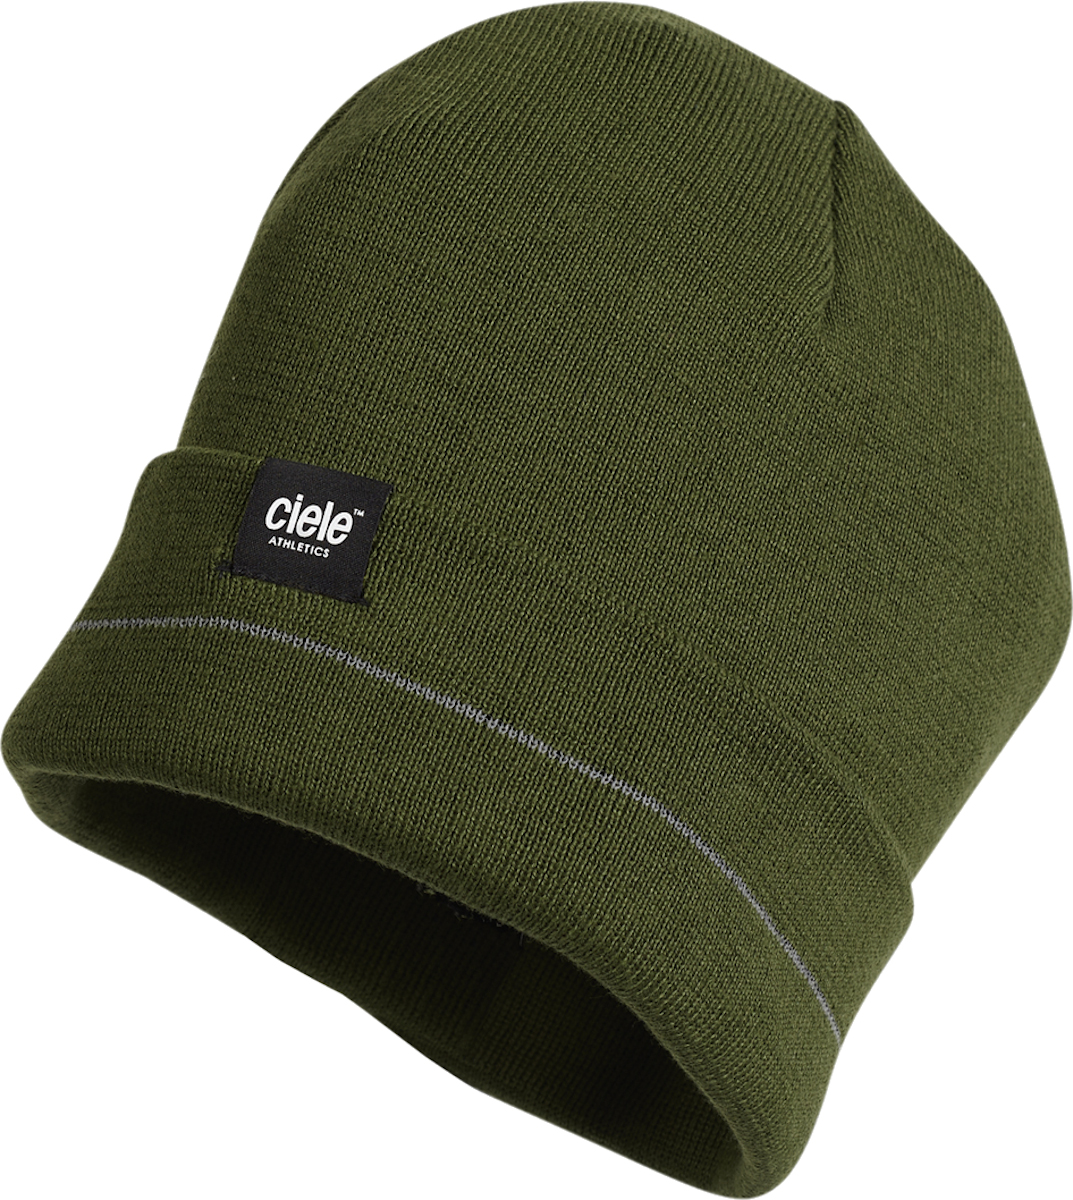 Give the gift of Promotion Hat Ciele CR3Beanie - Boreal to All the people